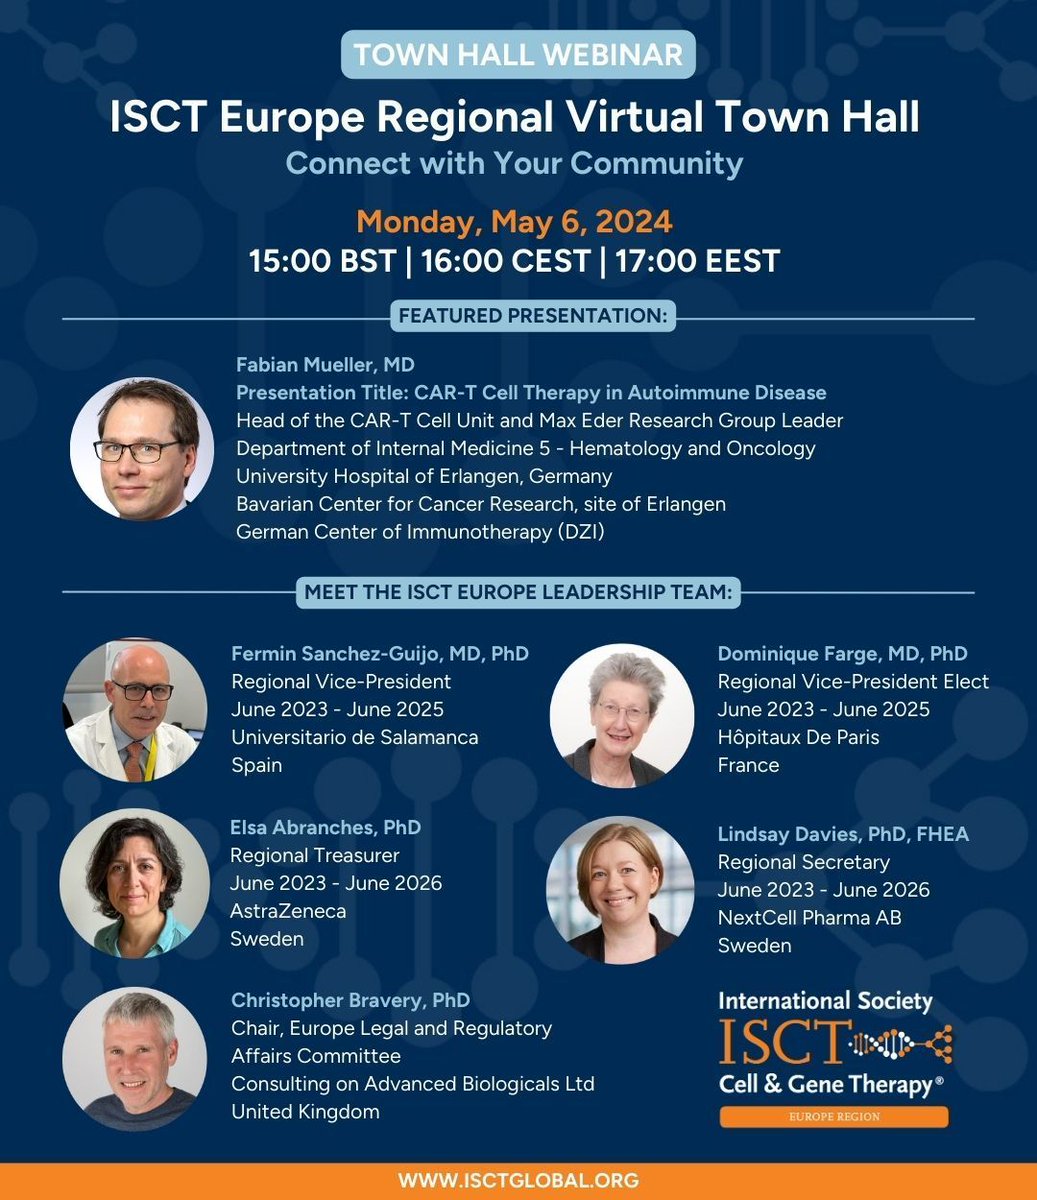 Calling all cell and gene therapy professionals in Europe - ISCT Invites you to join the upcoming Europe Regional Virtual Town Hall. Register now: buff.ly/49HvmlJ